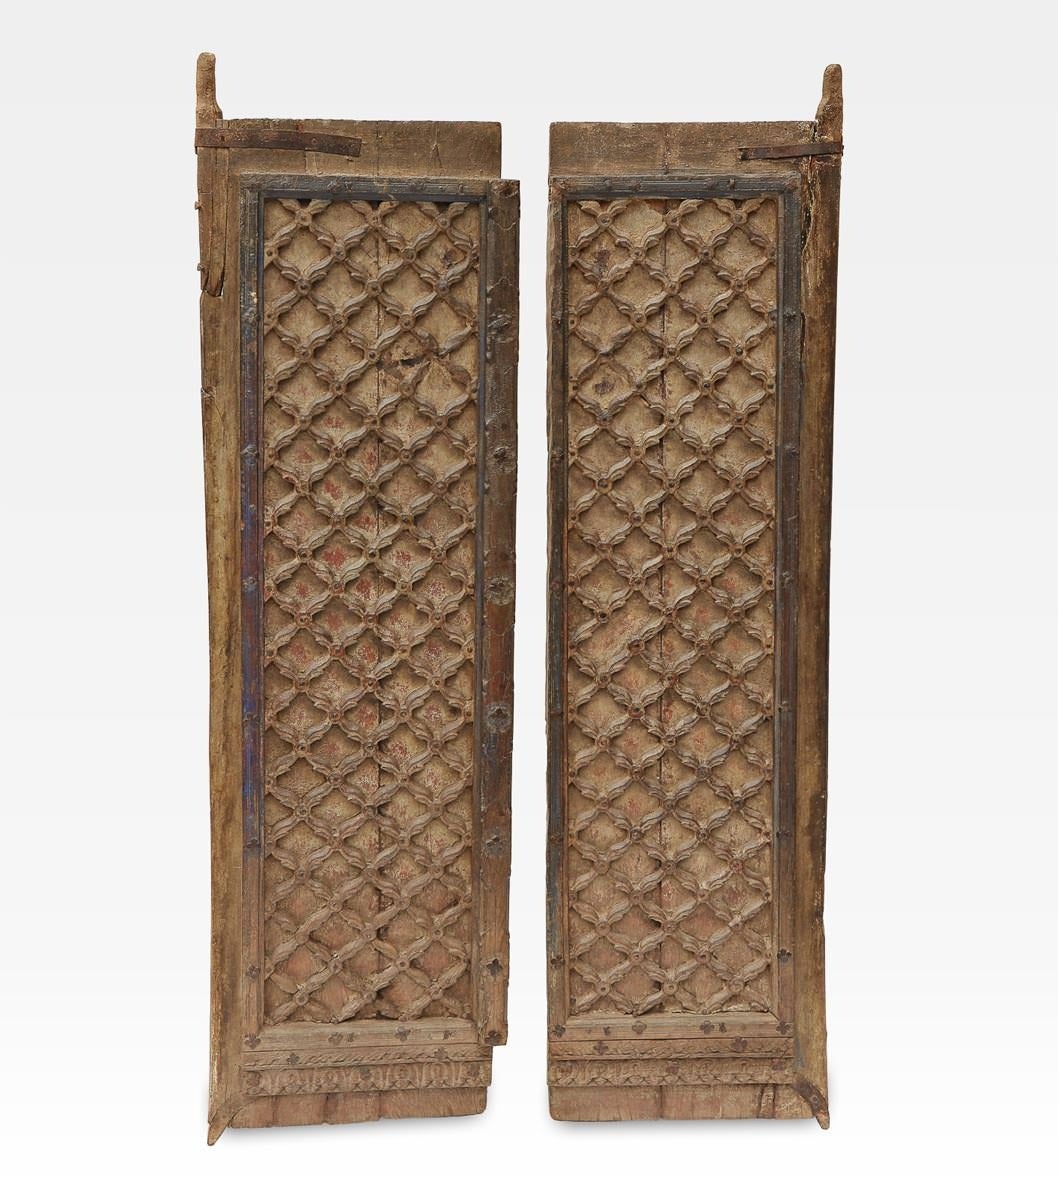 Ancient indian double door, from Mughal period. Made of wood, decorated with a carved grid. On the base there is a beautiful frieze with traditional indian motifs. On the frame are visible traces of natural blu dye.